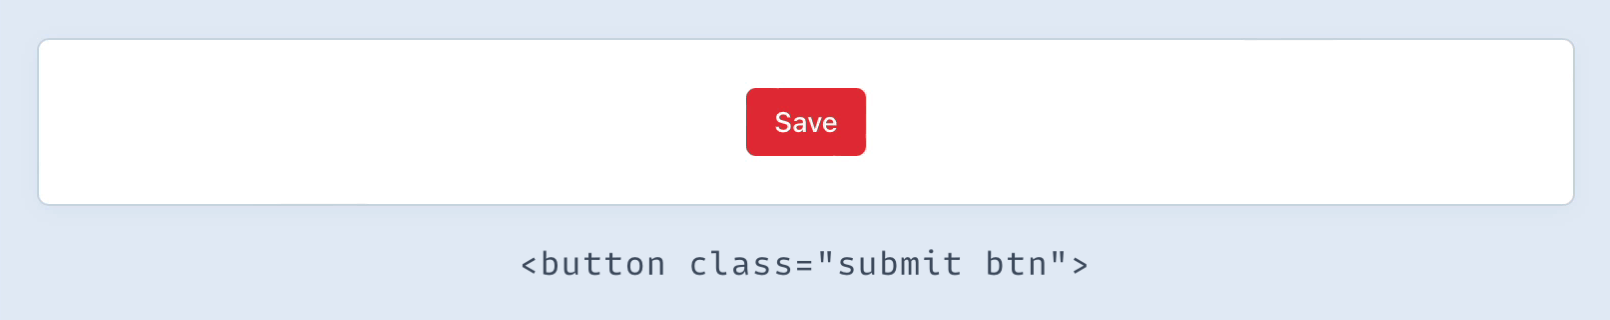 Animation of a submit button with its “Save a Copy” label that switches to a spinner when a loading class is added to the element